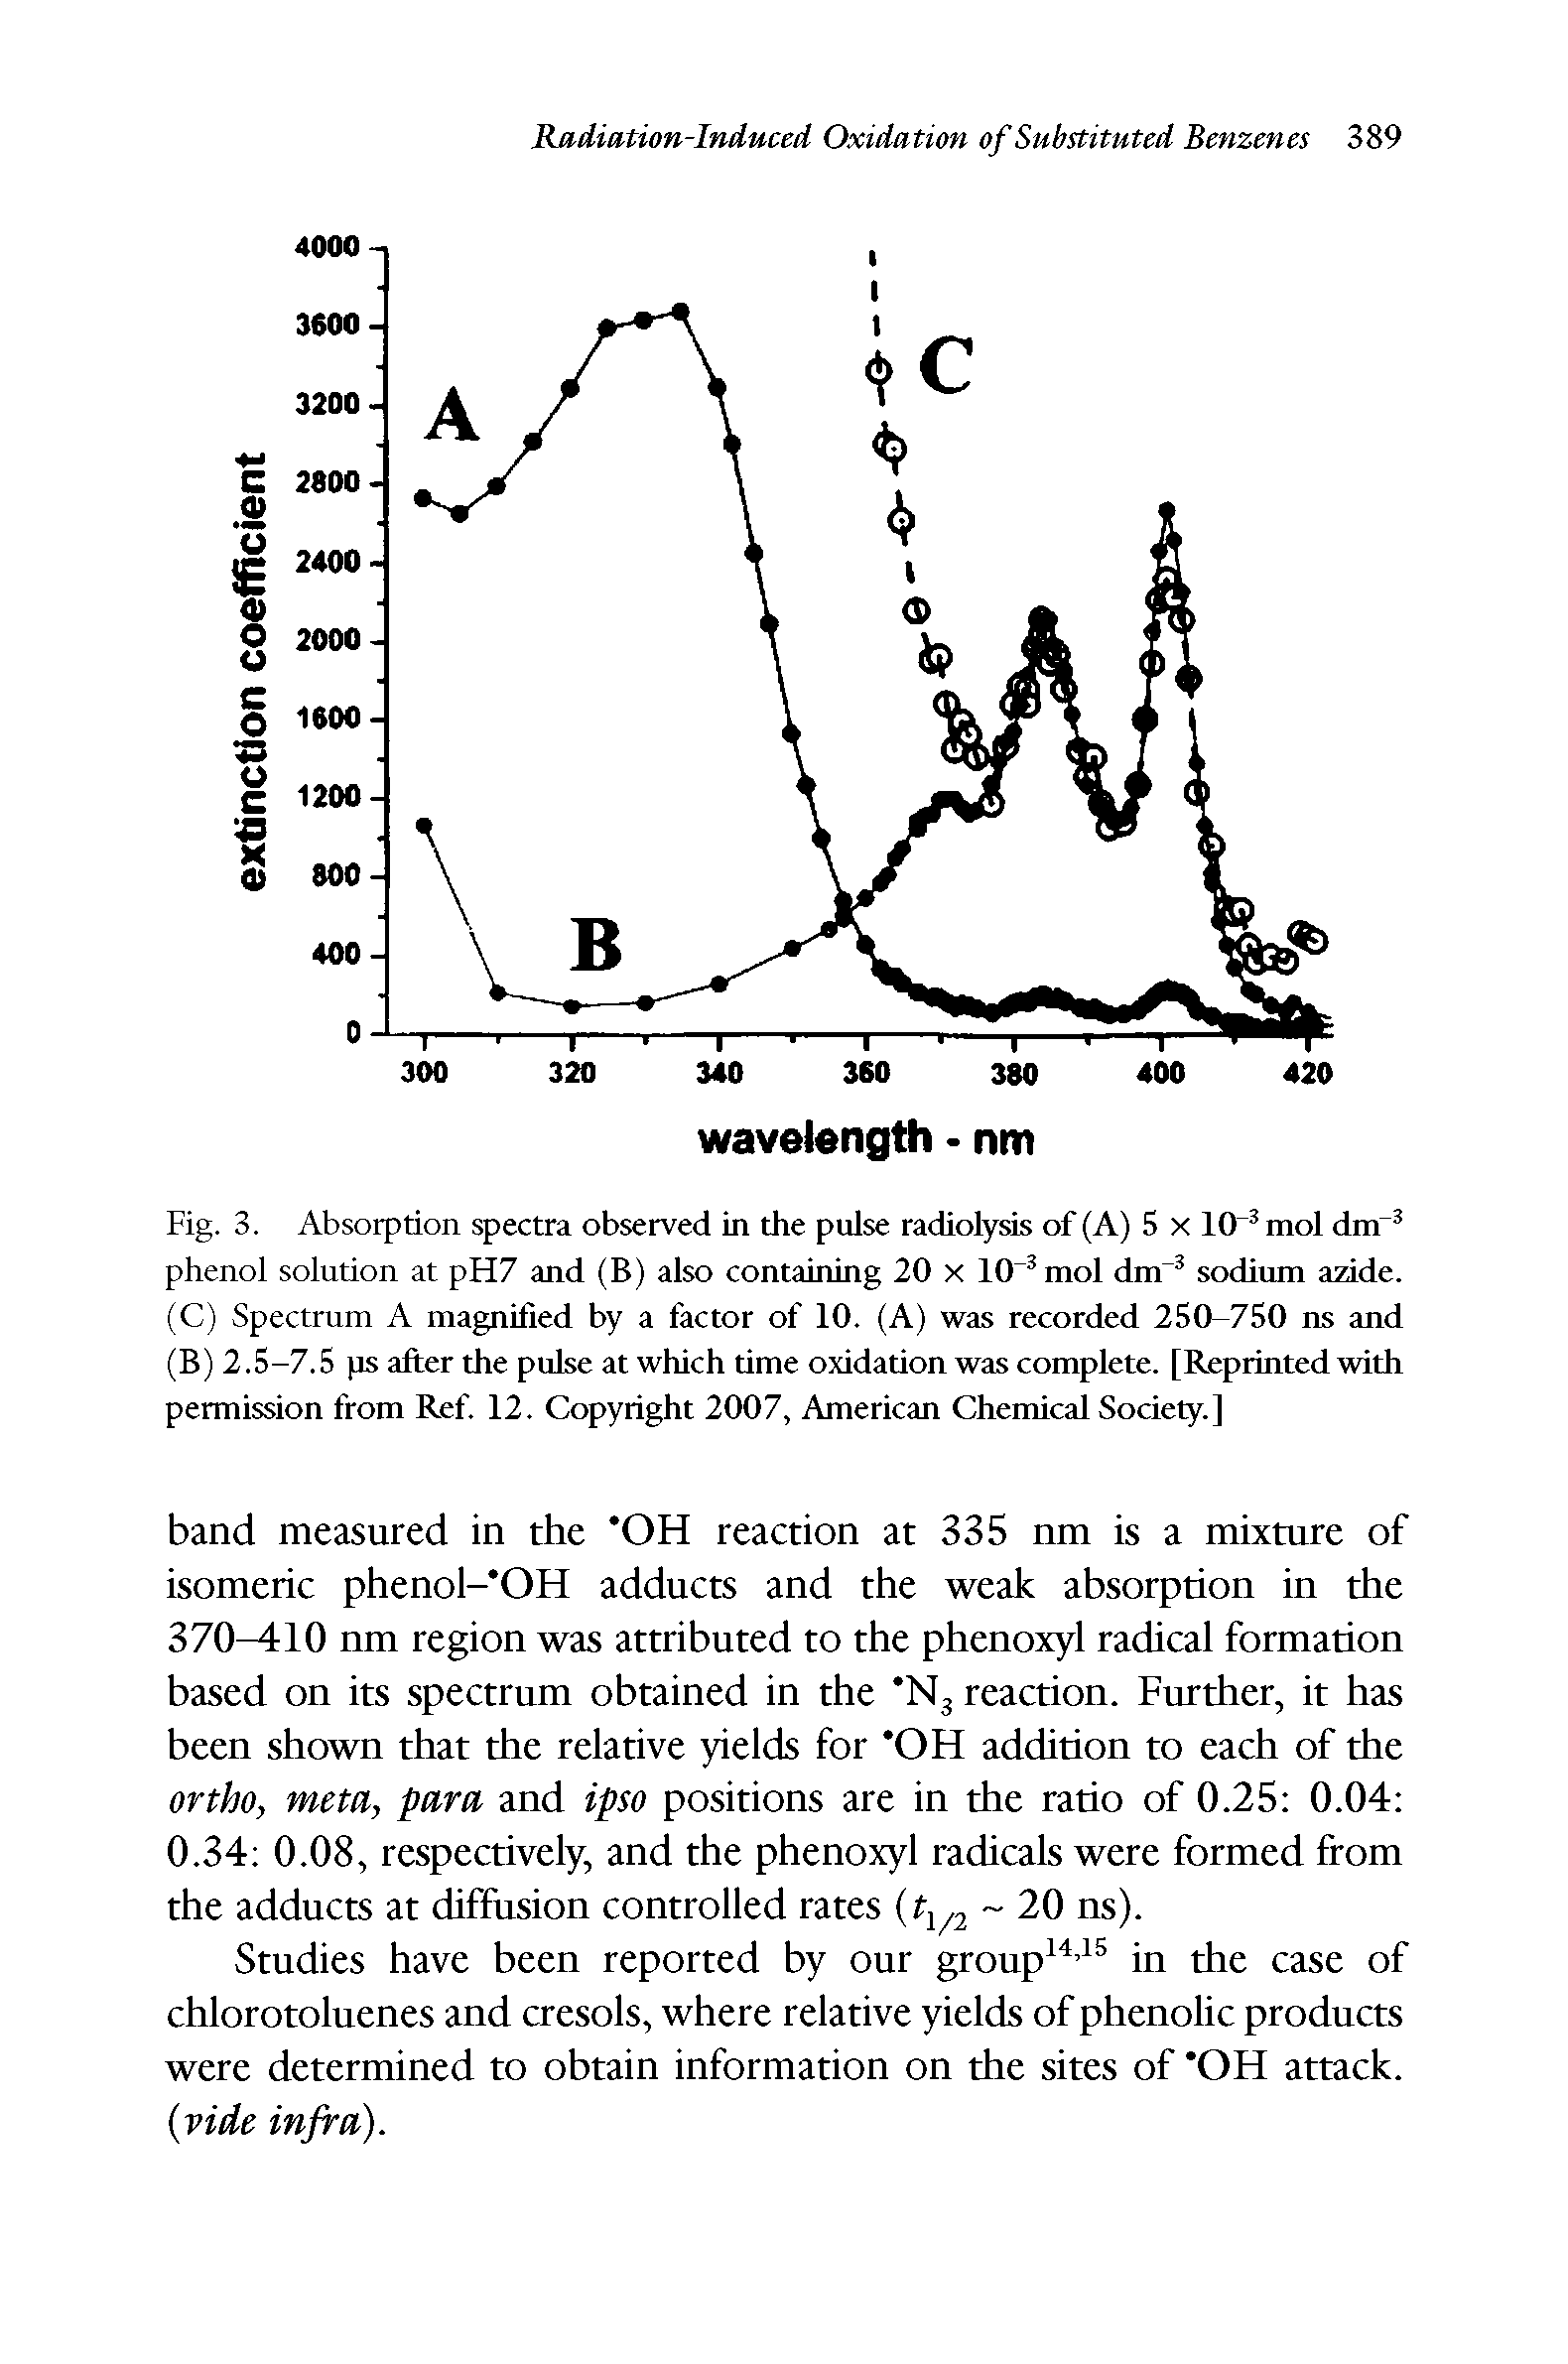 Fig. 3. Absorption spectra observed in the pulse radiolysis of (A) 5 x 10" mol dm" phenol solution at pH7 and (B) also containing 20 x 10" mol dm" sodium azide. (C) Spectrum A magnified by a factor of 10. (A) was recorded 250-750 ns and (B)2.5-7.5 ps after the pulse at which time oxidation was complete. [Reprinted with permission from Ref. 12. Copyright 2007, American Chemical Society.]...